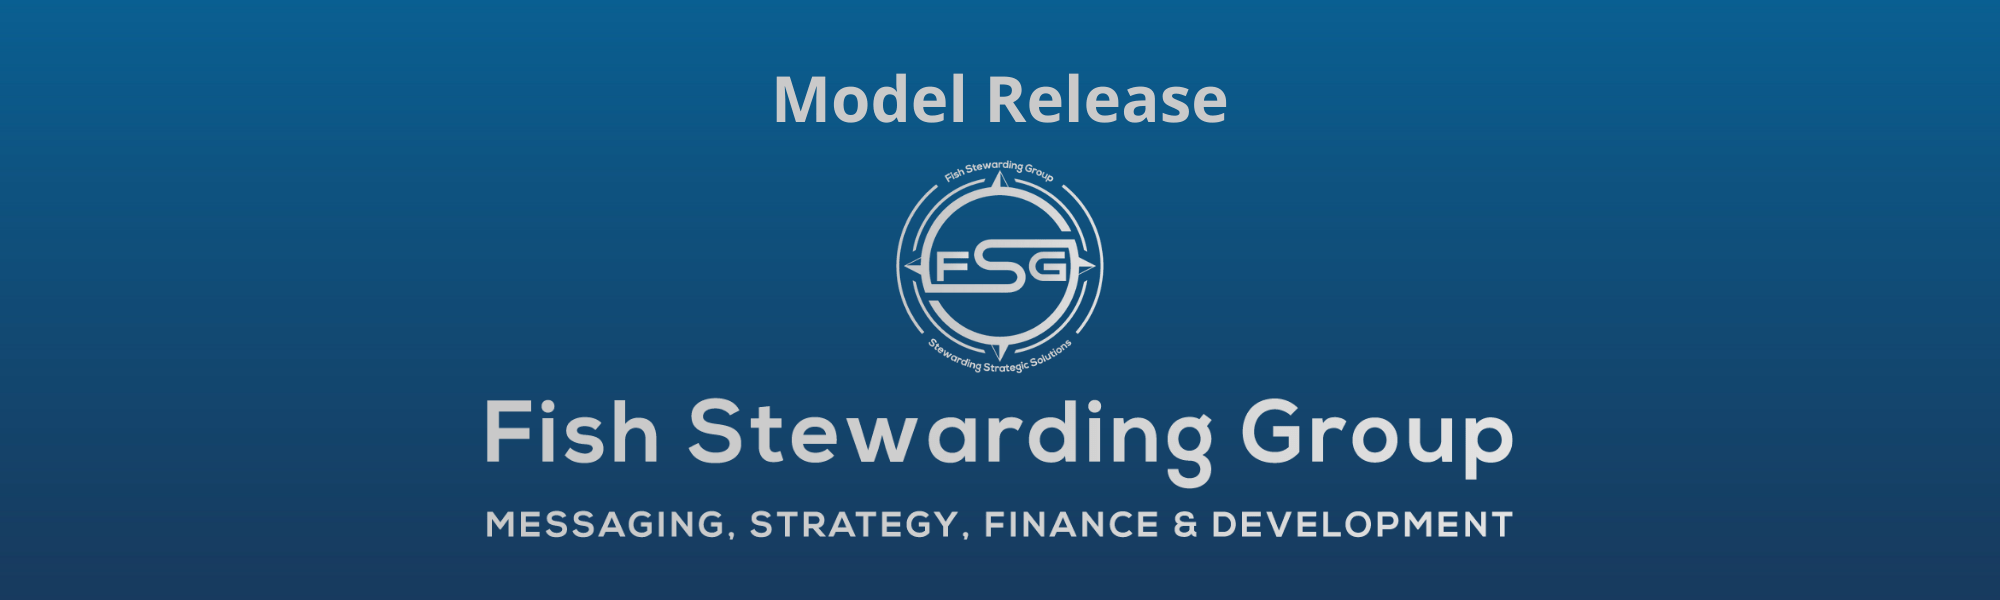 A thin rectangular Footer graphic for the Model Release page. The background is a blue gradient color that goes from a dark blue on the bottom to a lighter blue on top. The text in gray on top reads Model Release. The text in gray on the bottom center reads: Fish Stewarding Group and beneath that, the text reads Messaging, Strategy, Finance and Development. In the center above the text is the FSG logo in gray. The logo has the letters FSG in the middle with a circle with four pointed arrows facing north, south, east and west with the S connected to that circle. Four rounded lines make the next circle of the circle and the last layer is a thin circle with the text on the Bottom that reads Stewarding Strategist Solutions and on top, the text reads Fish Stewarding Group.